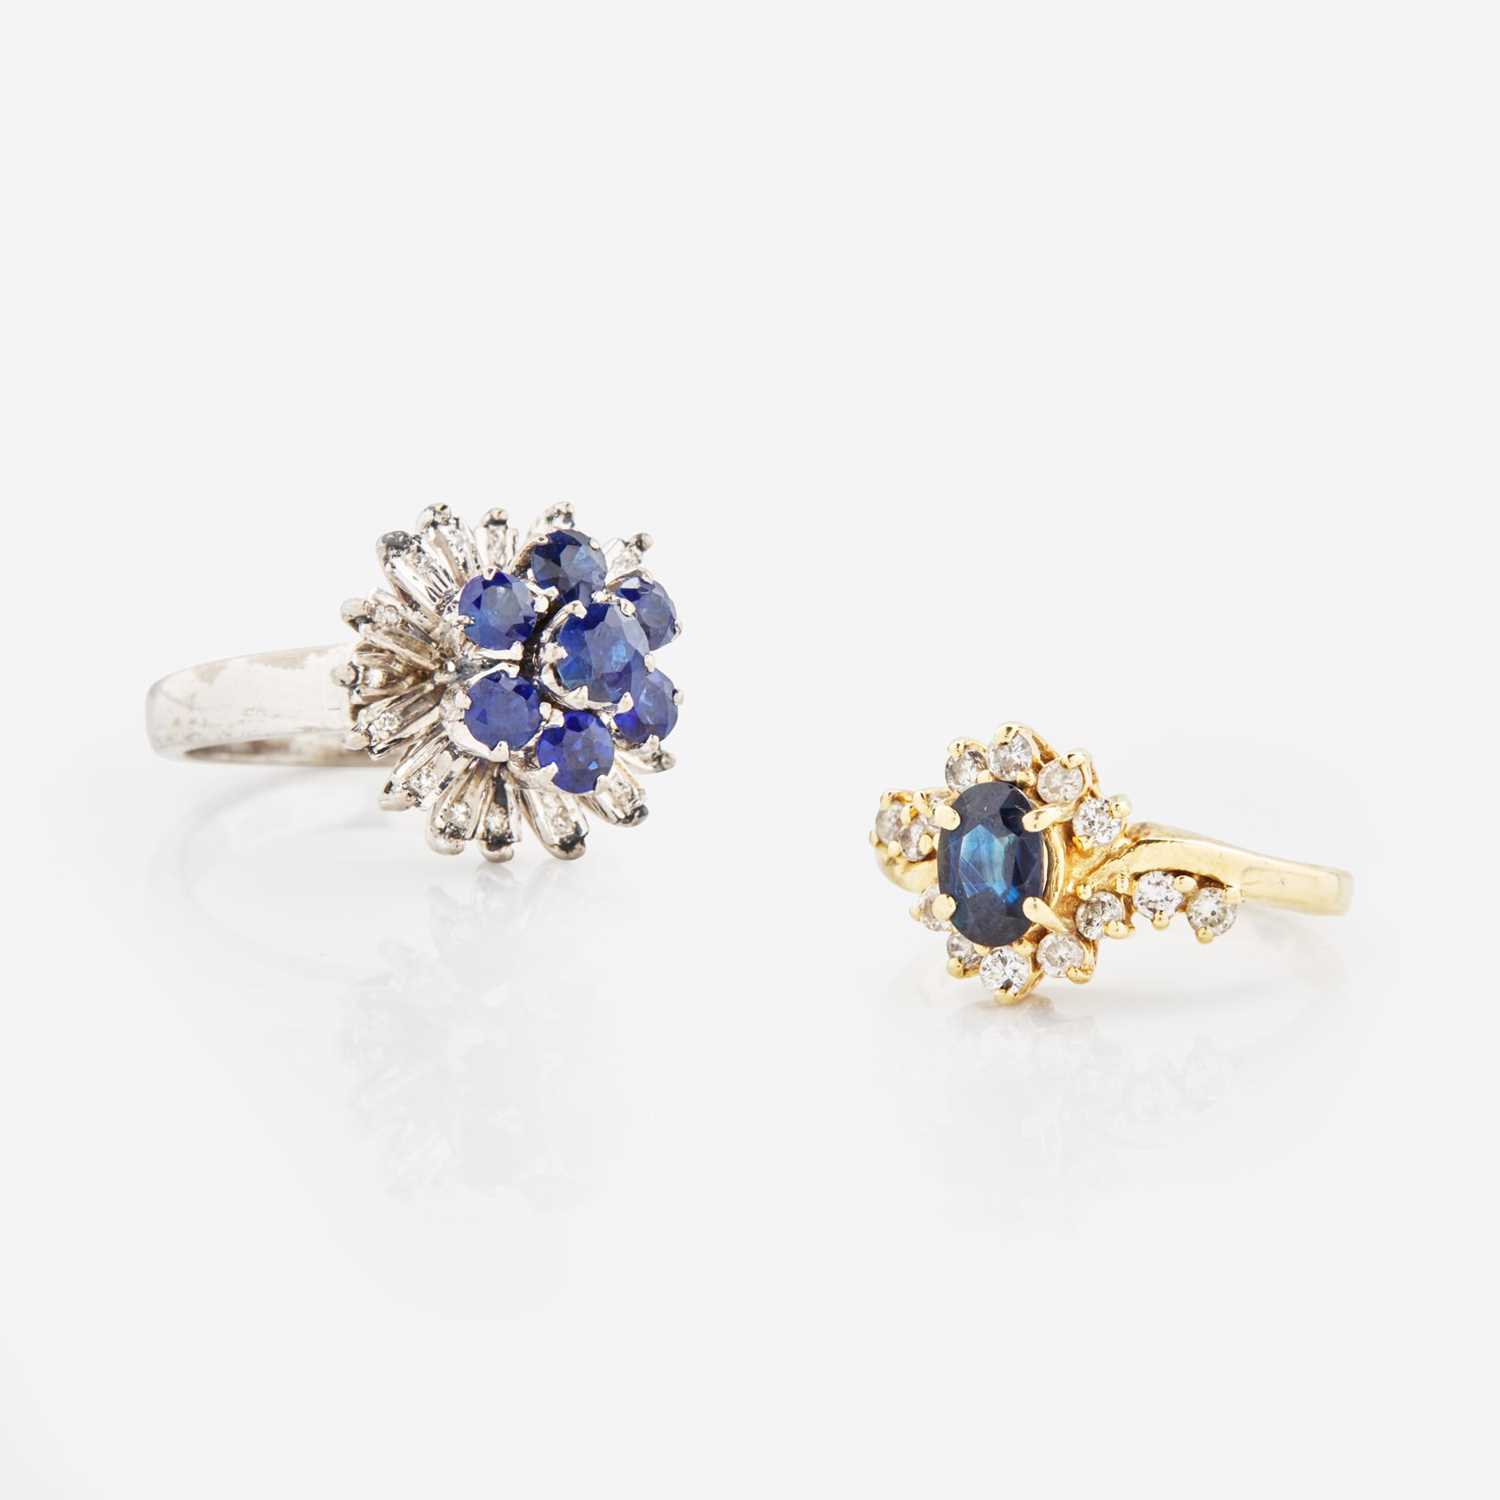 Lot 20 - A Collection of Two Sapphire and Diamond Rings